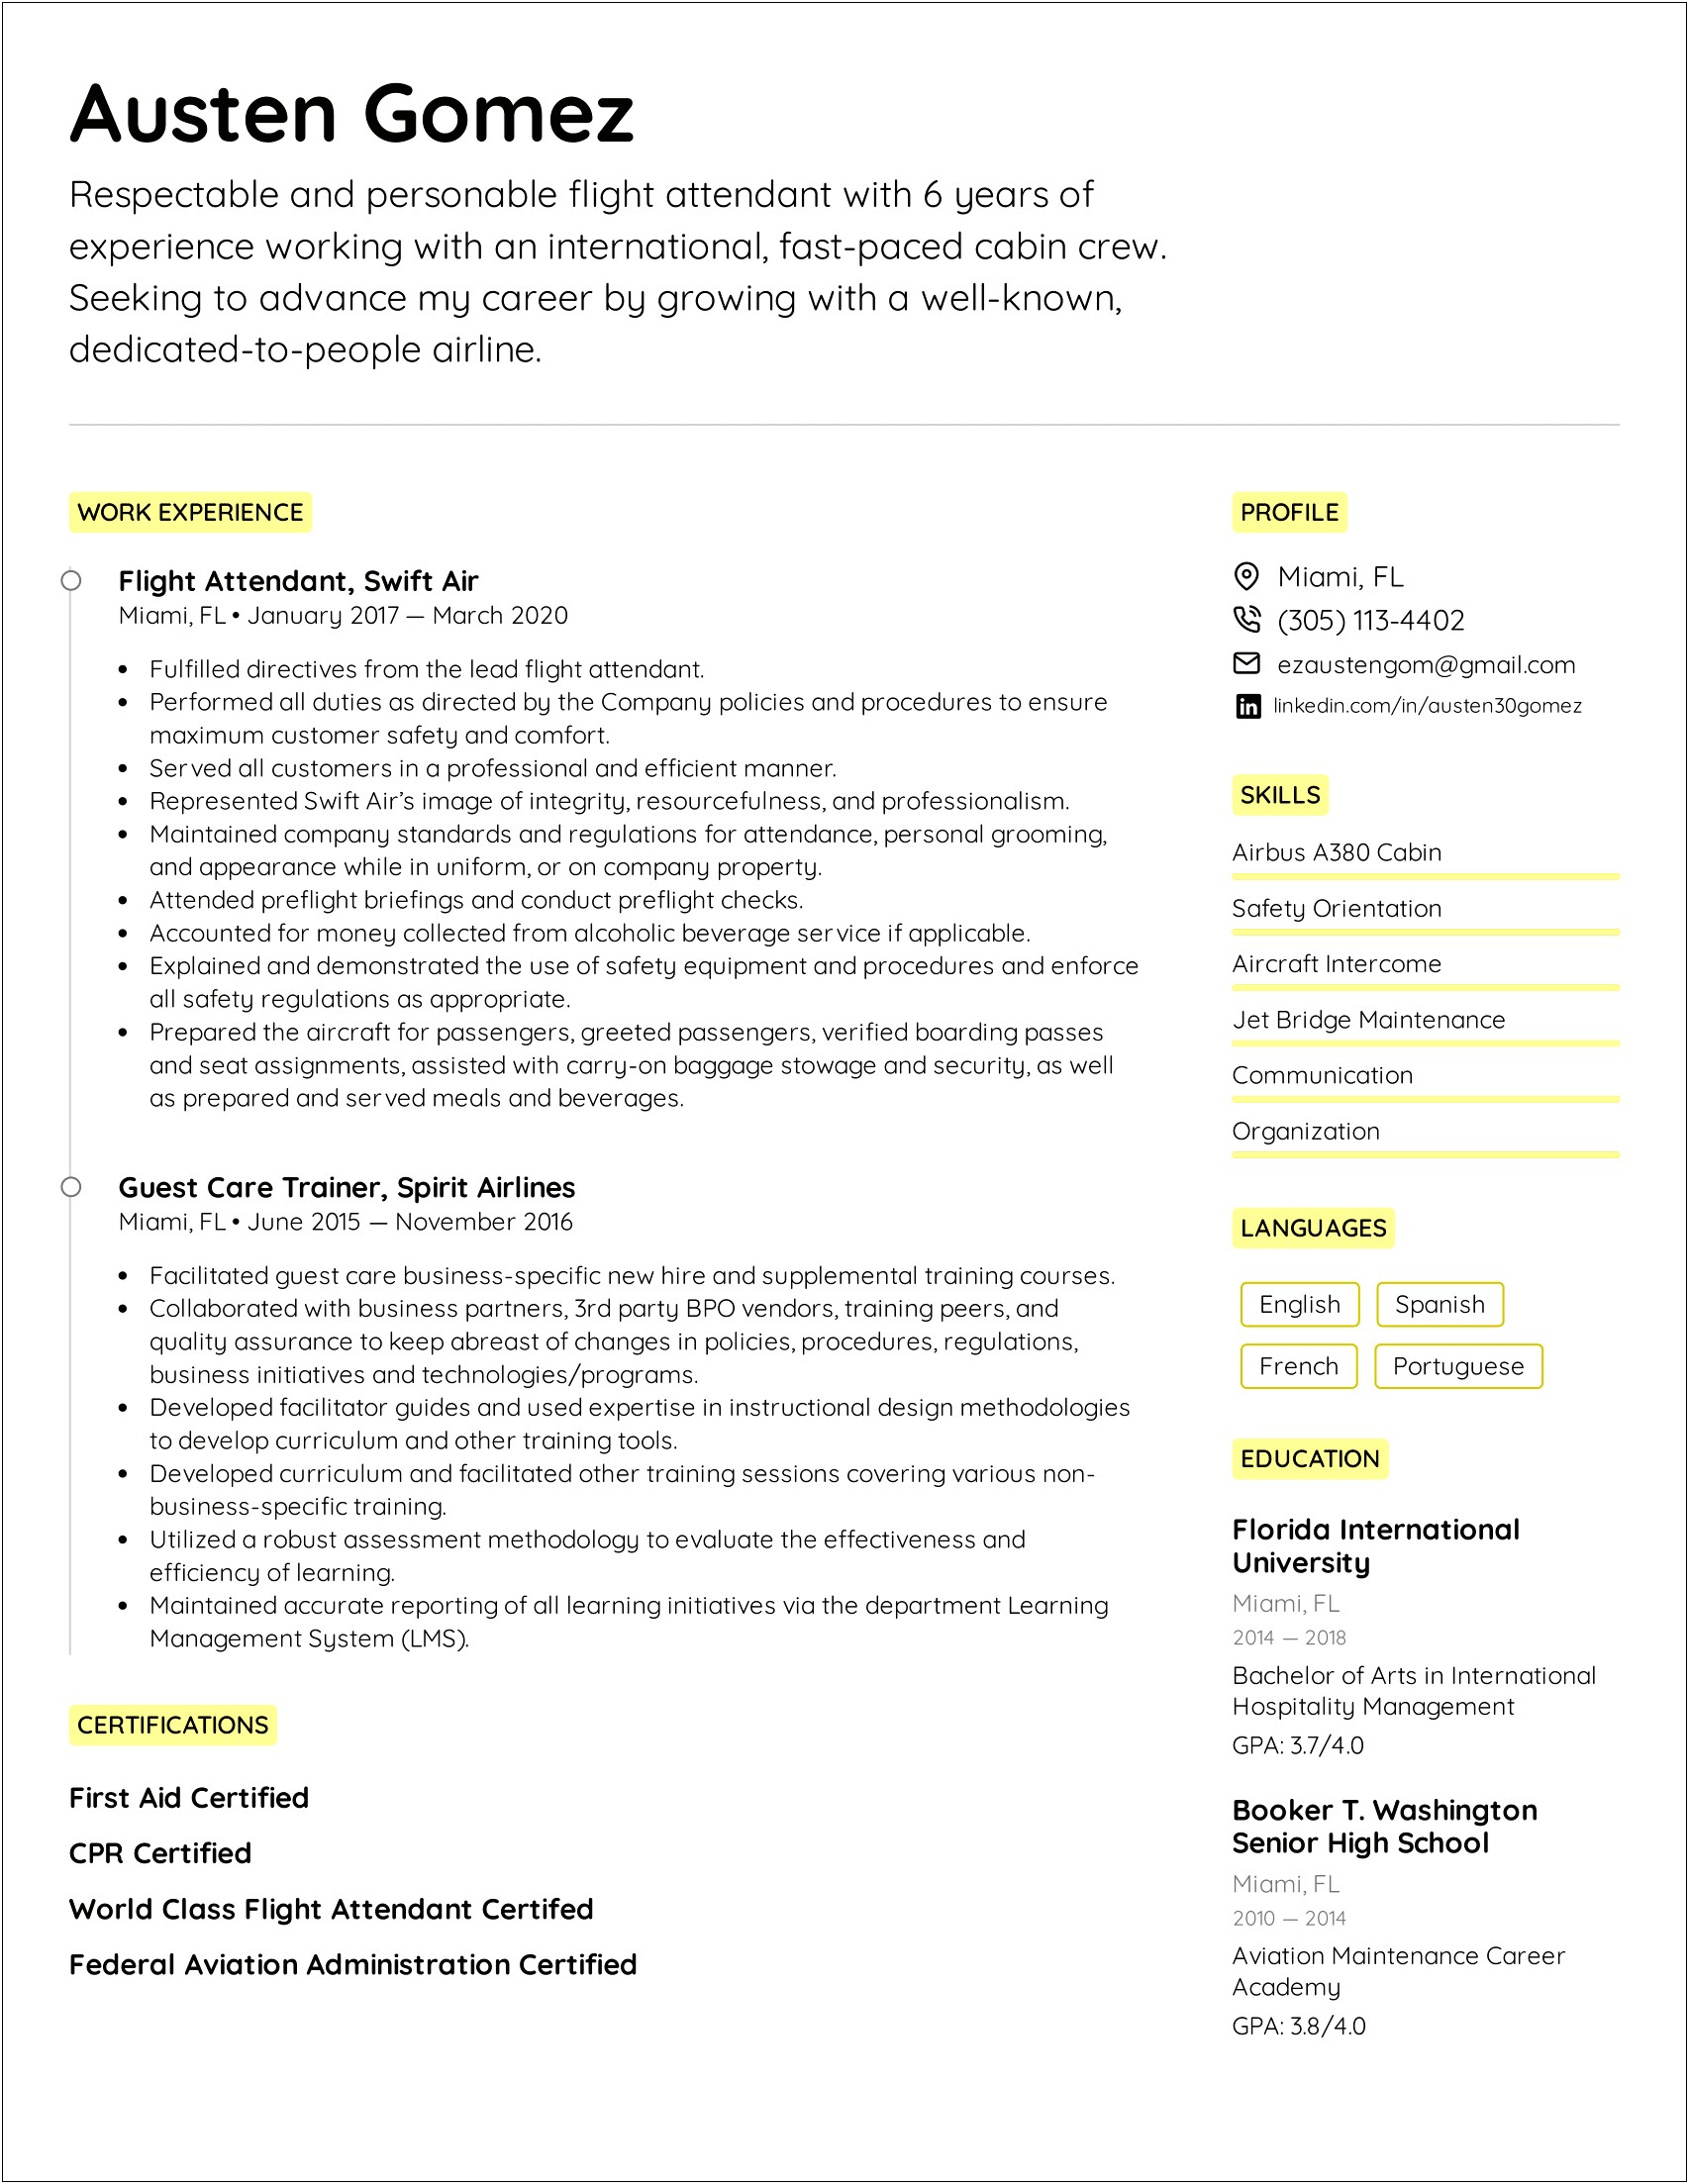 Sample Resume For Cabin Crew With Experience